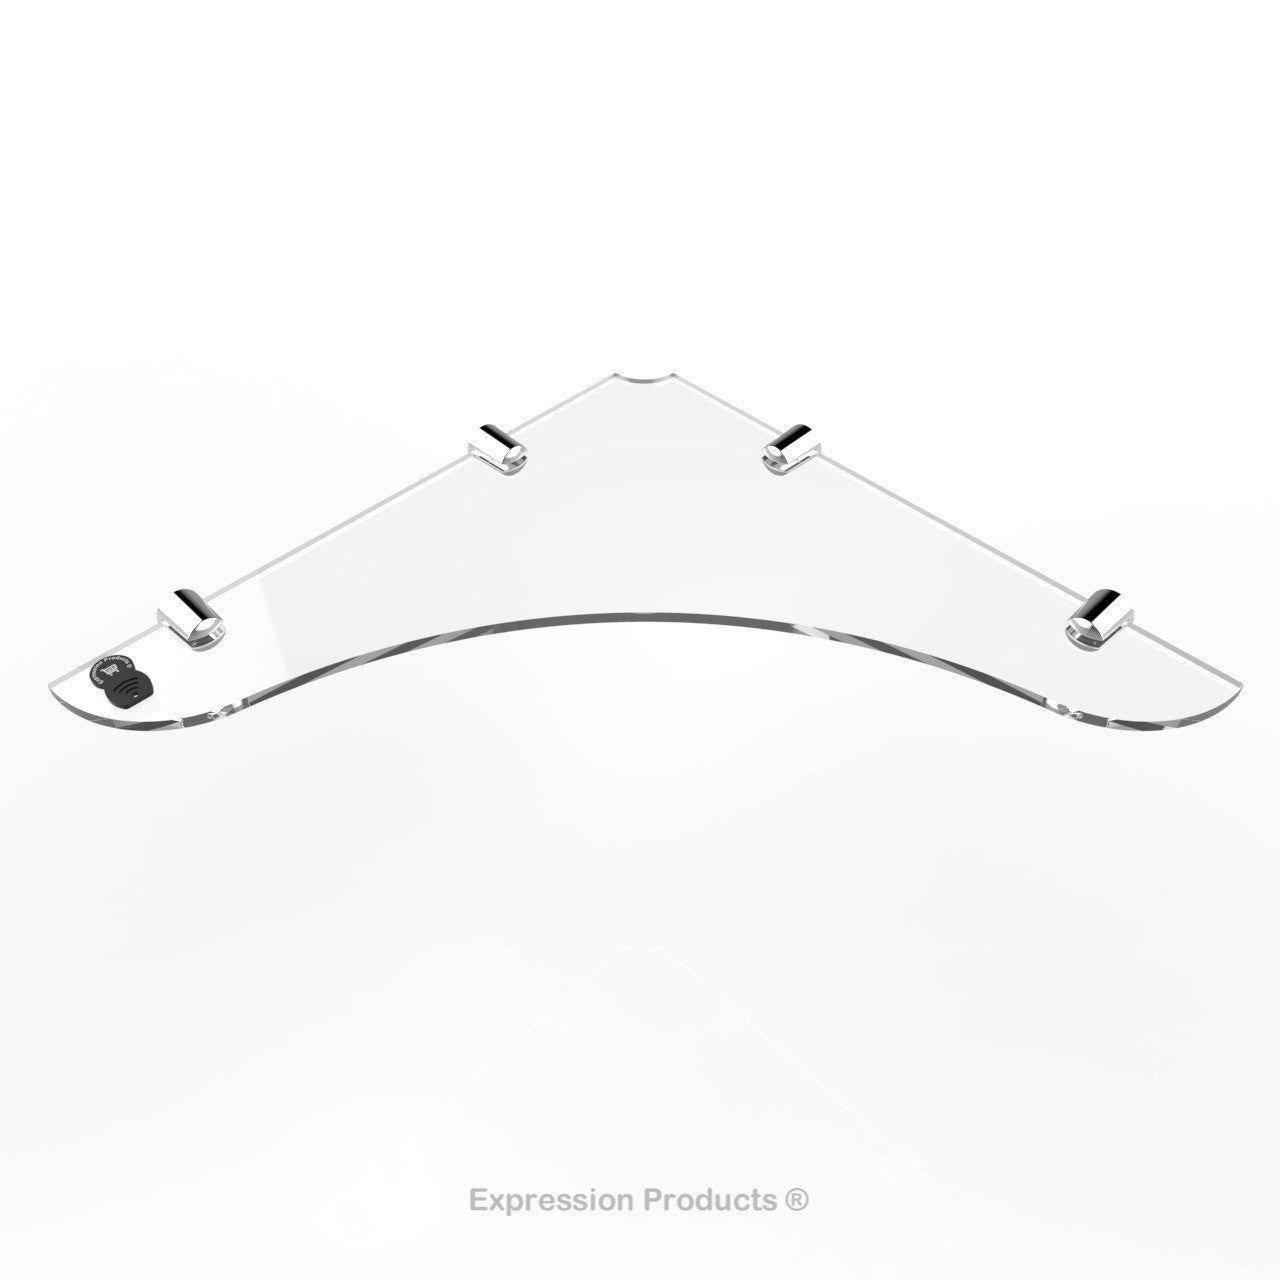 Corner Acrylic Shelf With Cable Feed Through - Style 005 - Expression Products Ltd